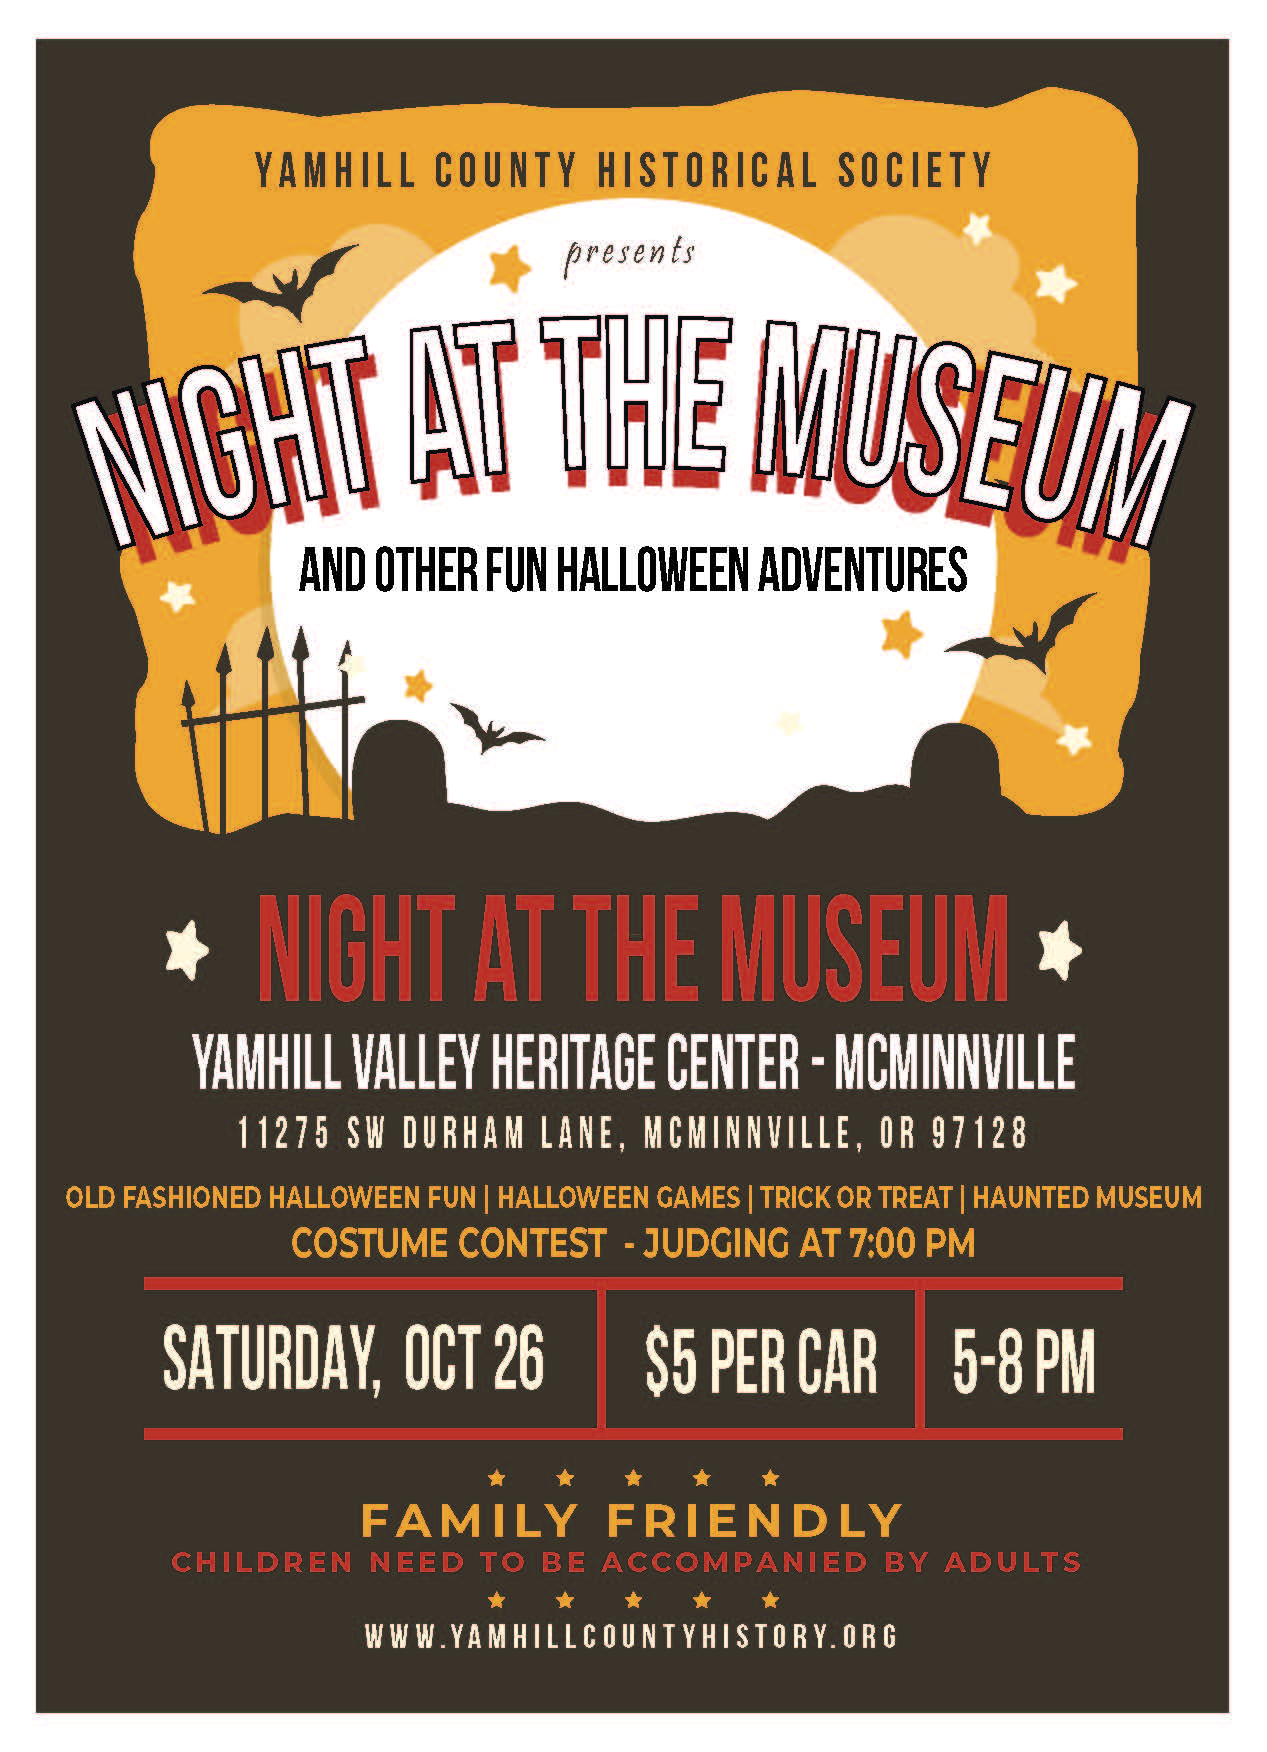 A Night at the Museum - Yamhill County Historical Society & Museums